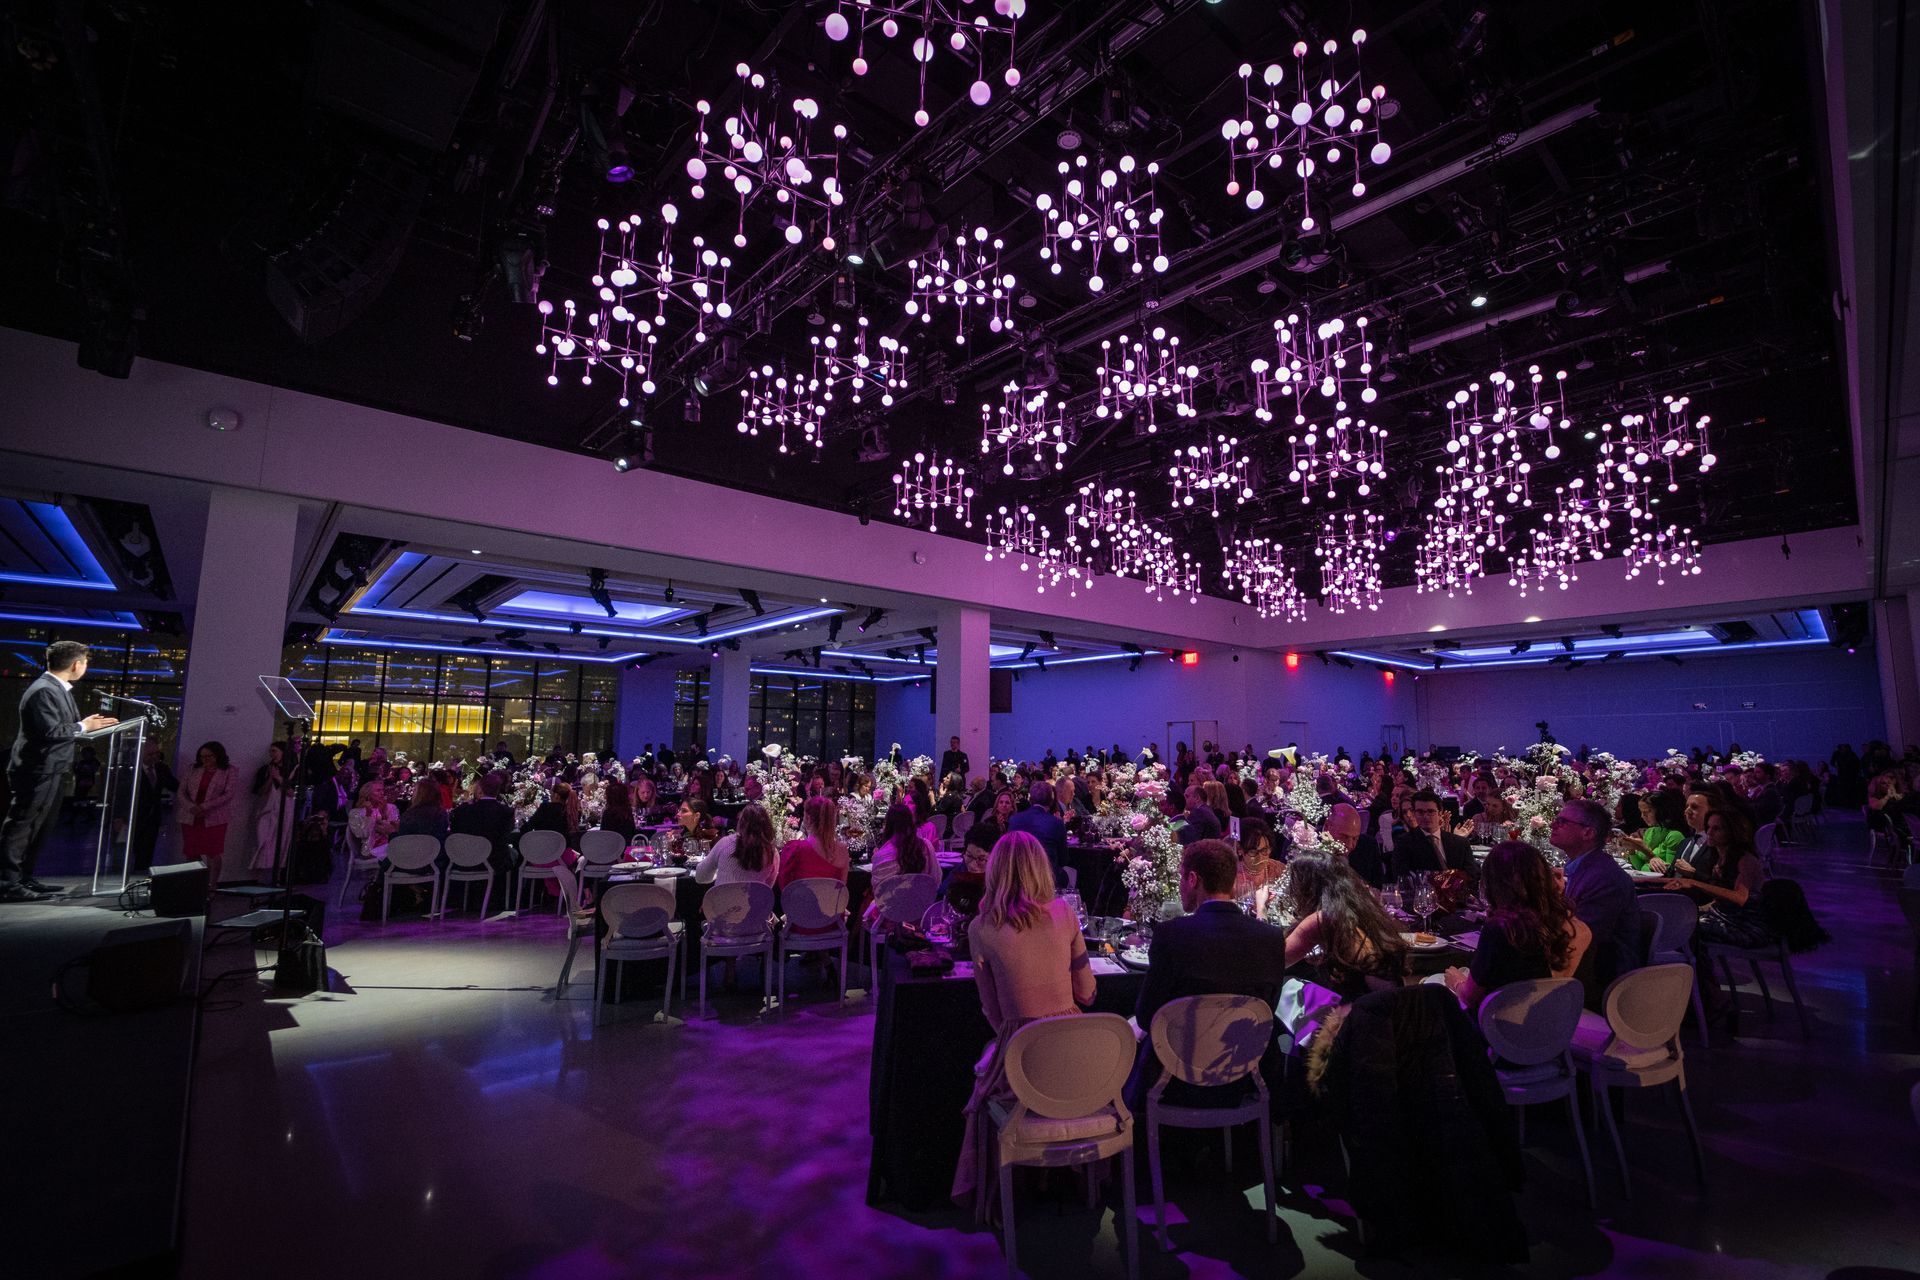 Planned Parenthood Event at The Glasshouse - photo of a large room filled with people sitting at tables with purple lights hanging from the ceiling .